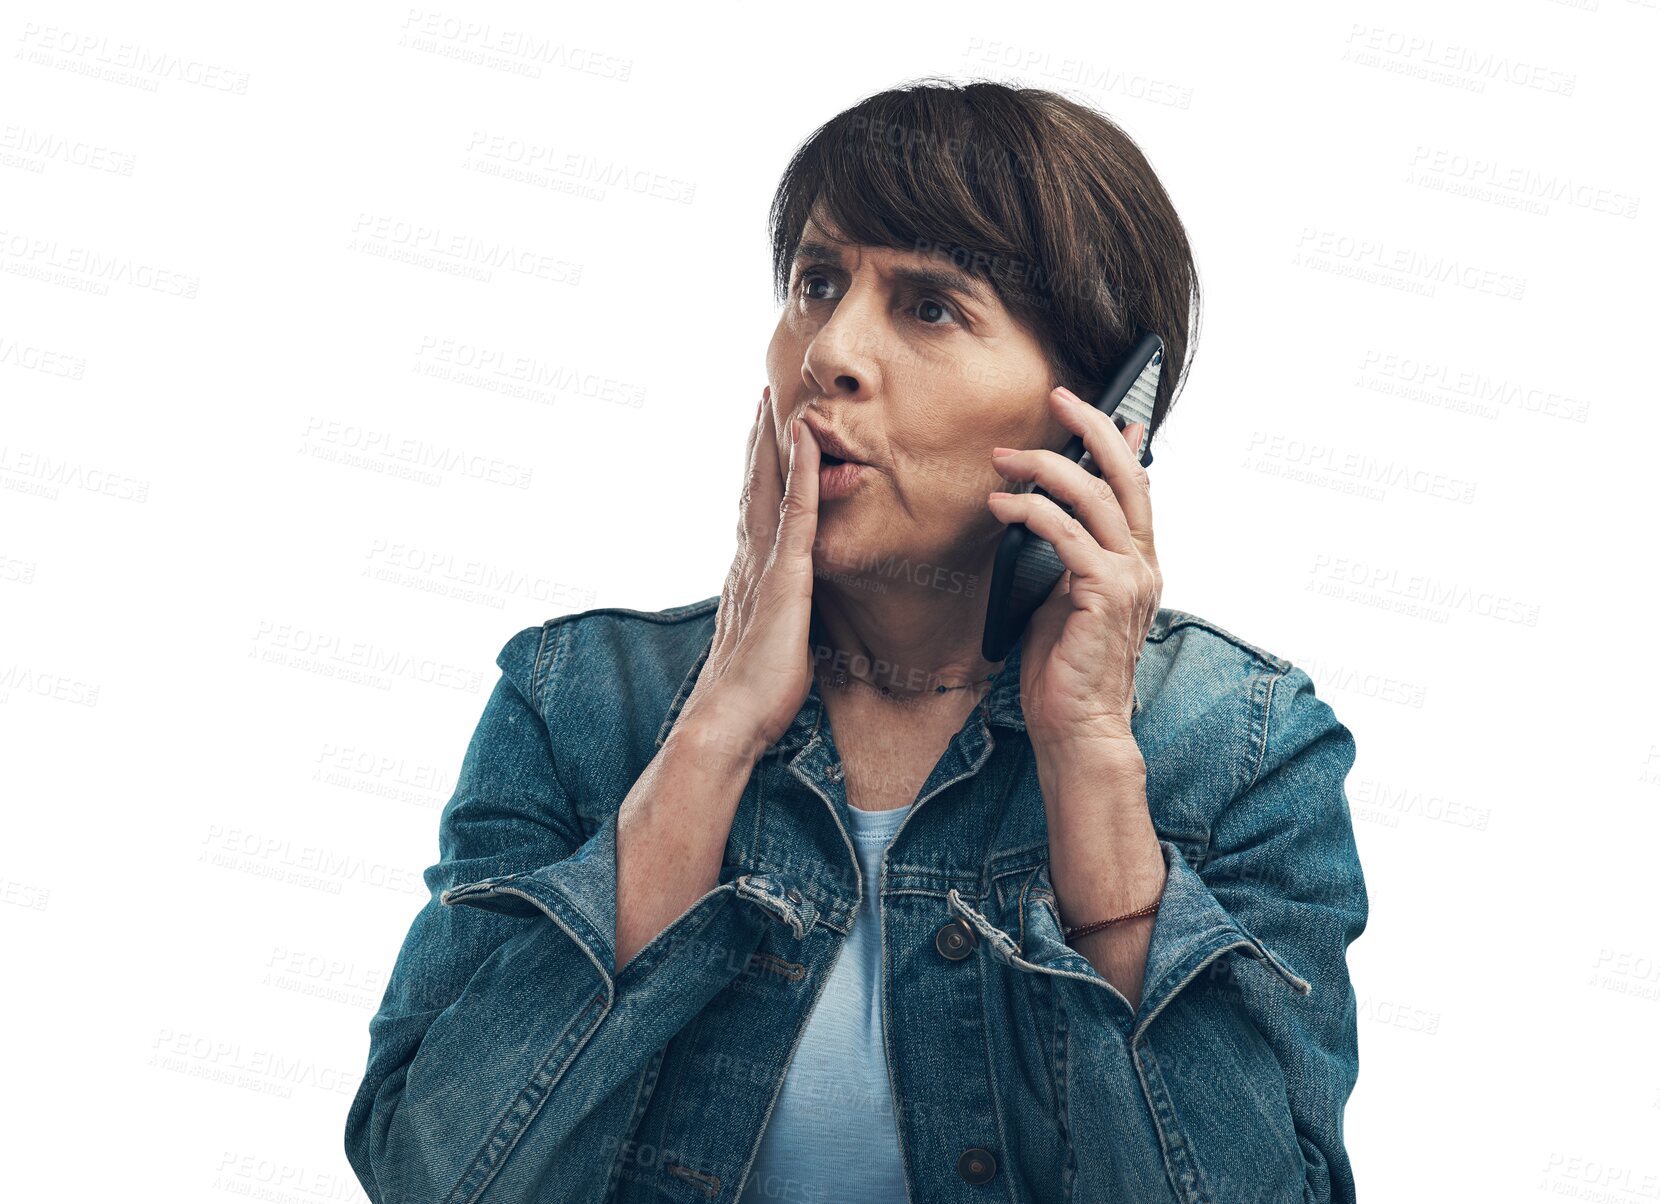 Buy stock photo Phone call, confused and senior woman shocked, news and lady isolated on a transparent background. Mature female person, mobile app and gossip with a cellphone, crazy surprise and png with connection